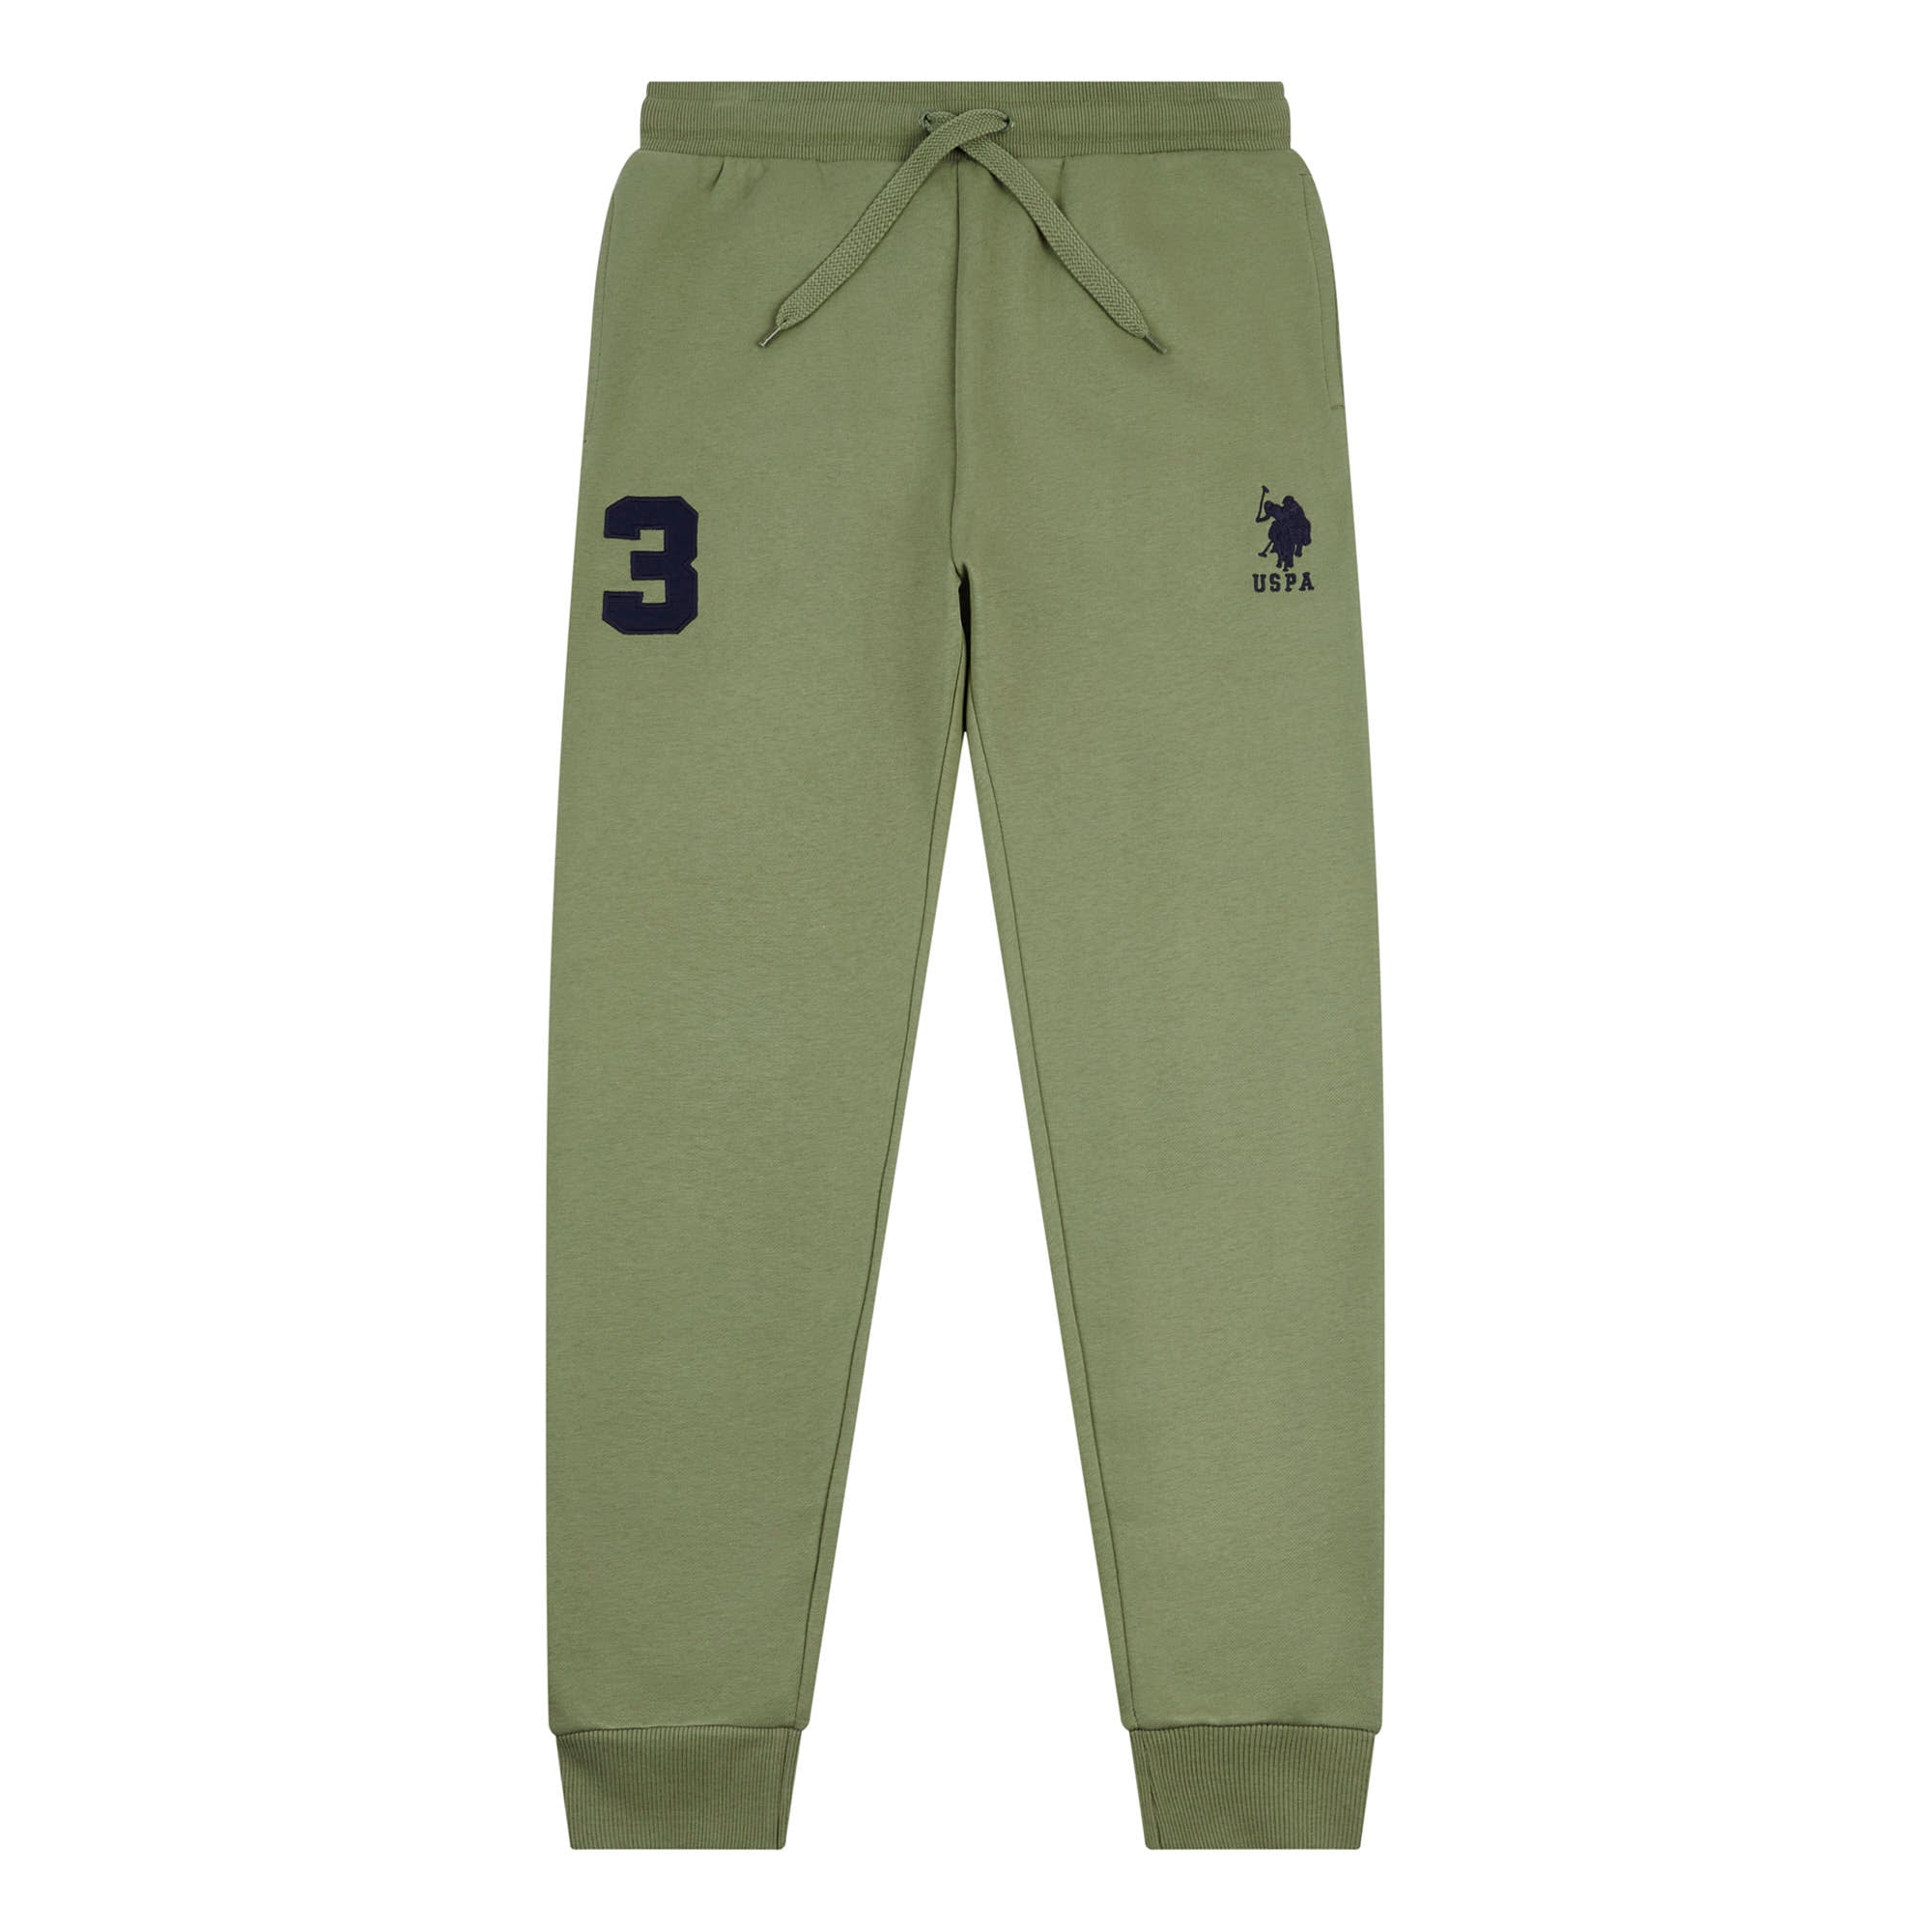 Mens Player 3 Joggers in Deep Lichen Green